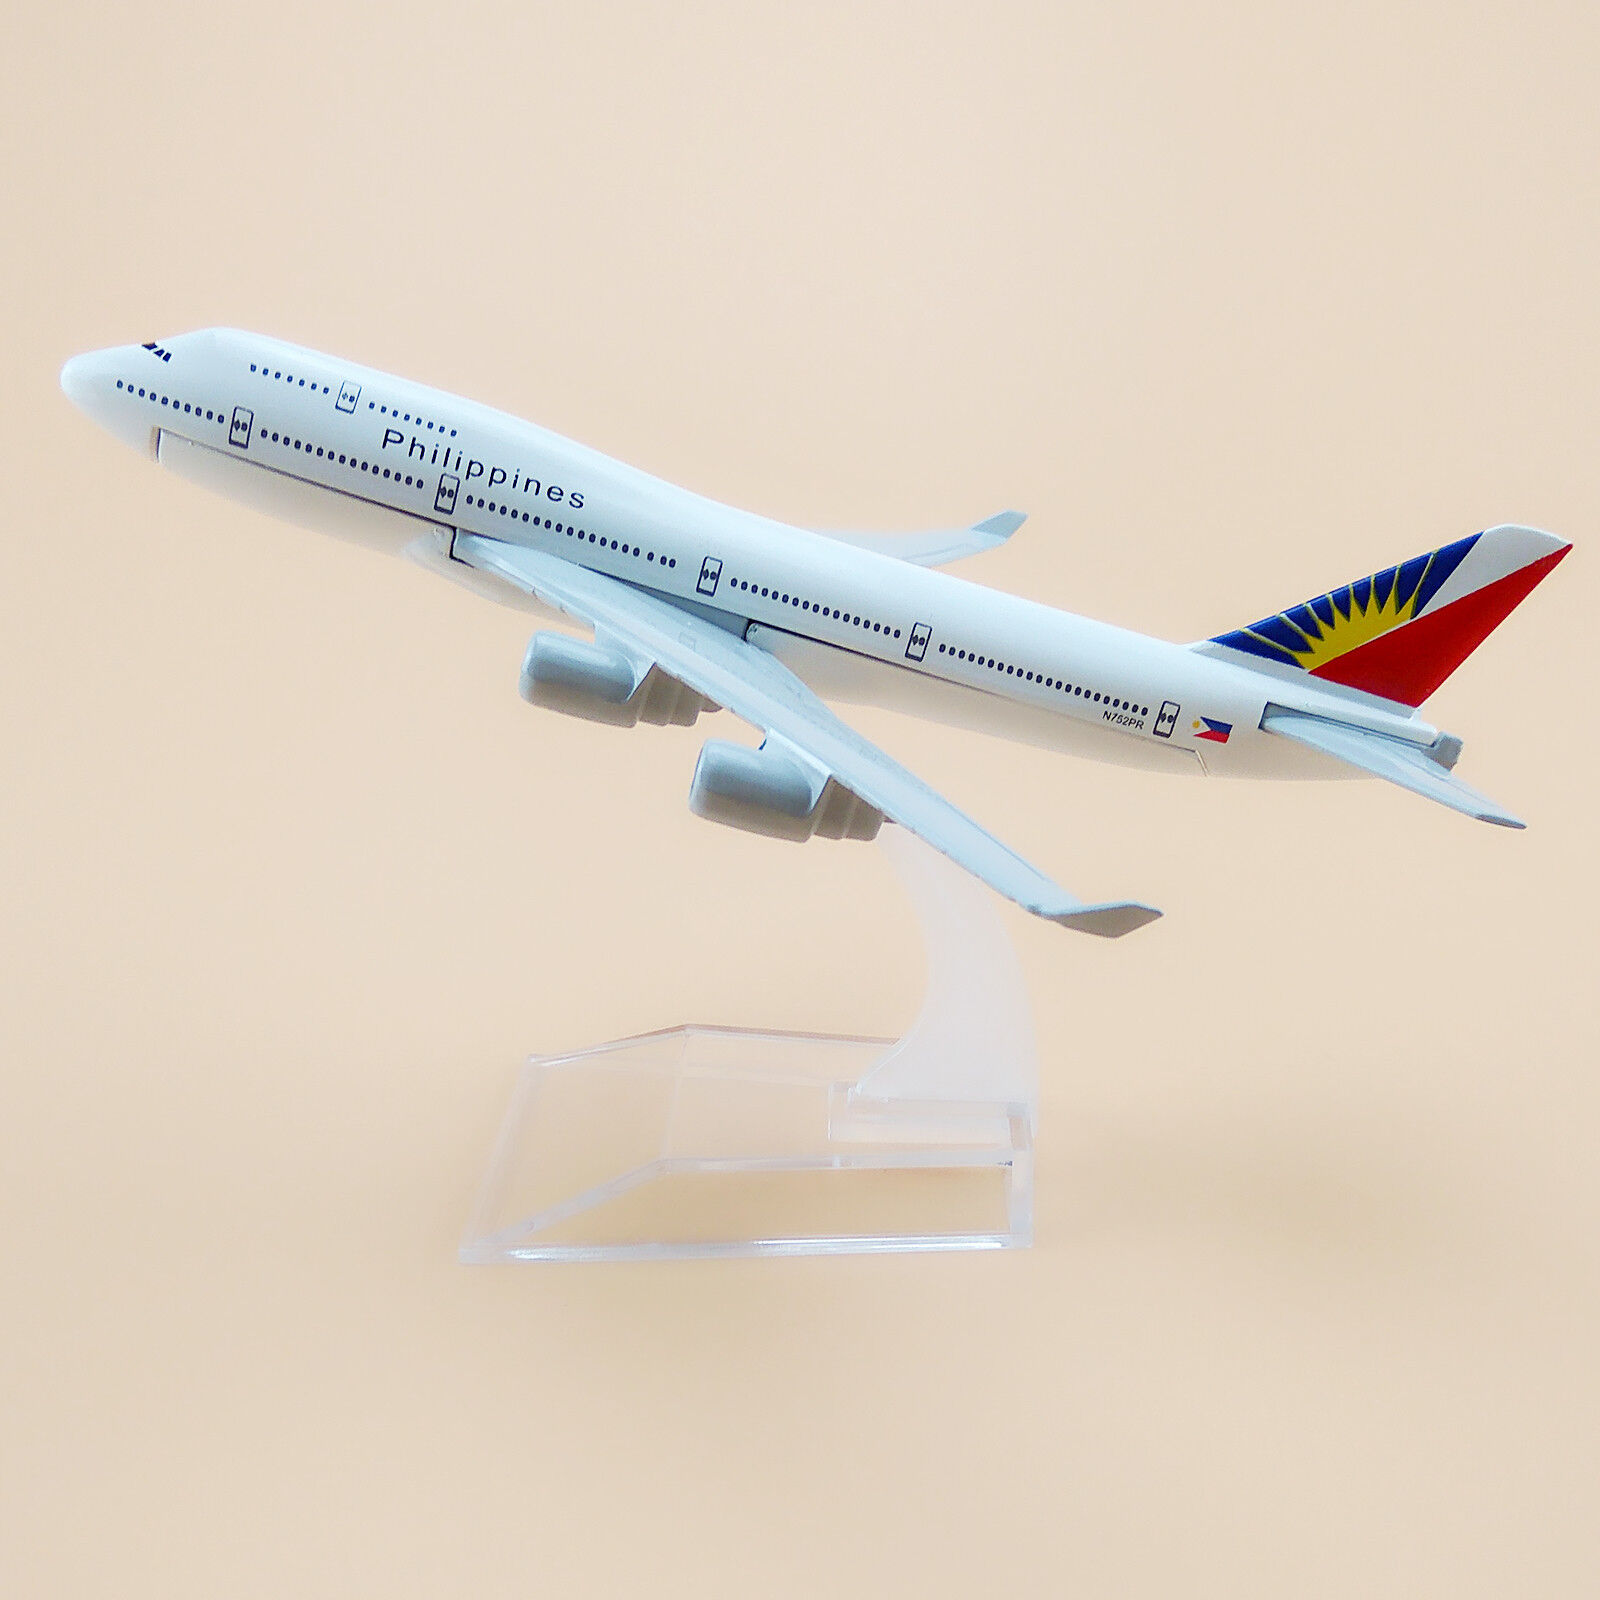 16cm Air Philippines Boeing B747 Airlines Diecast Airplane Model Plane Aircraft